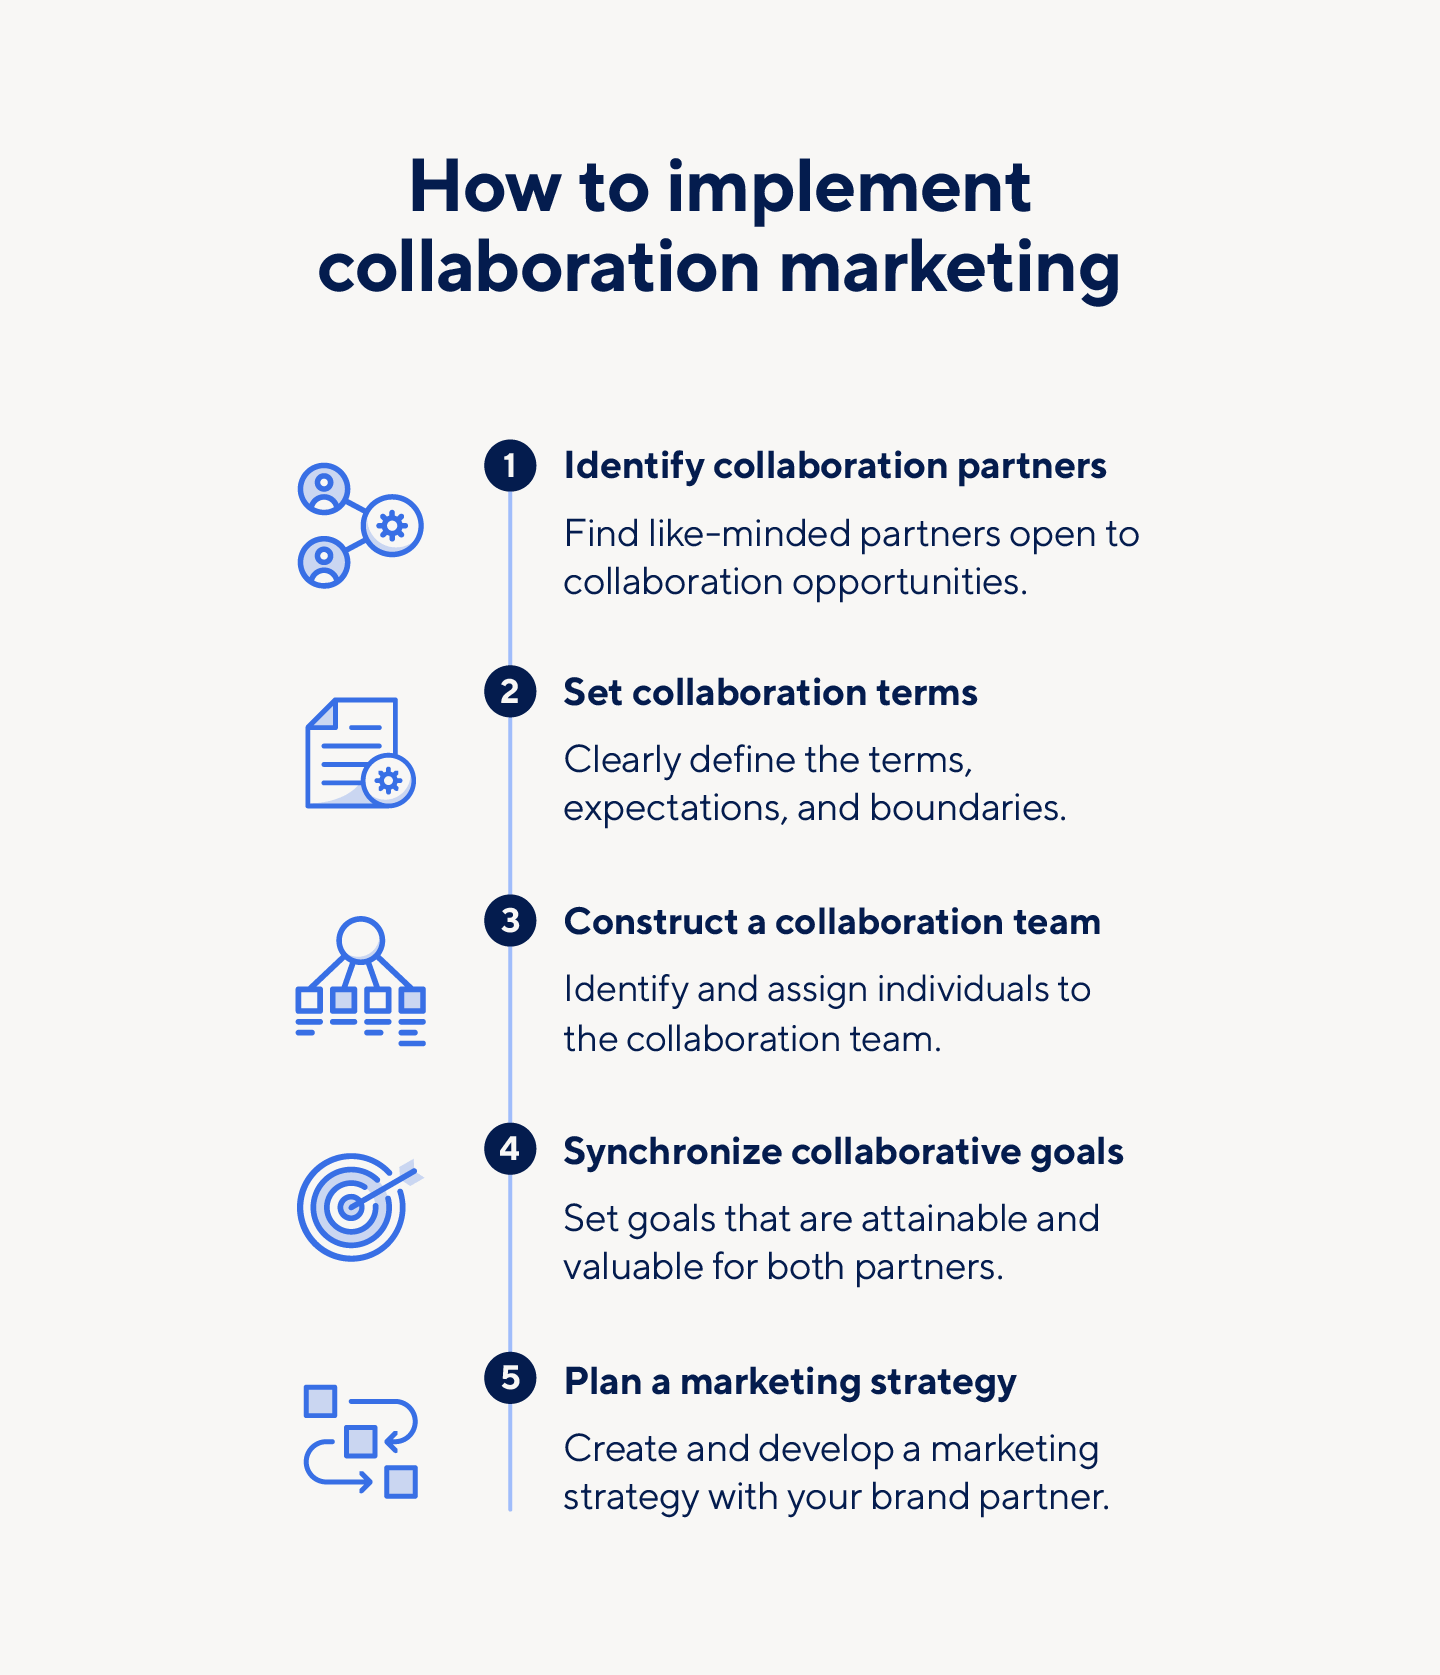 Collaboration marketing can be implemented in five steps.